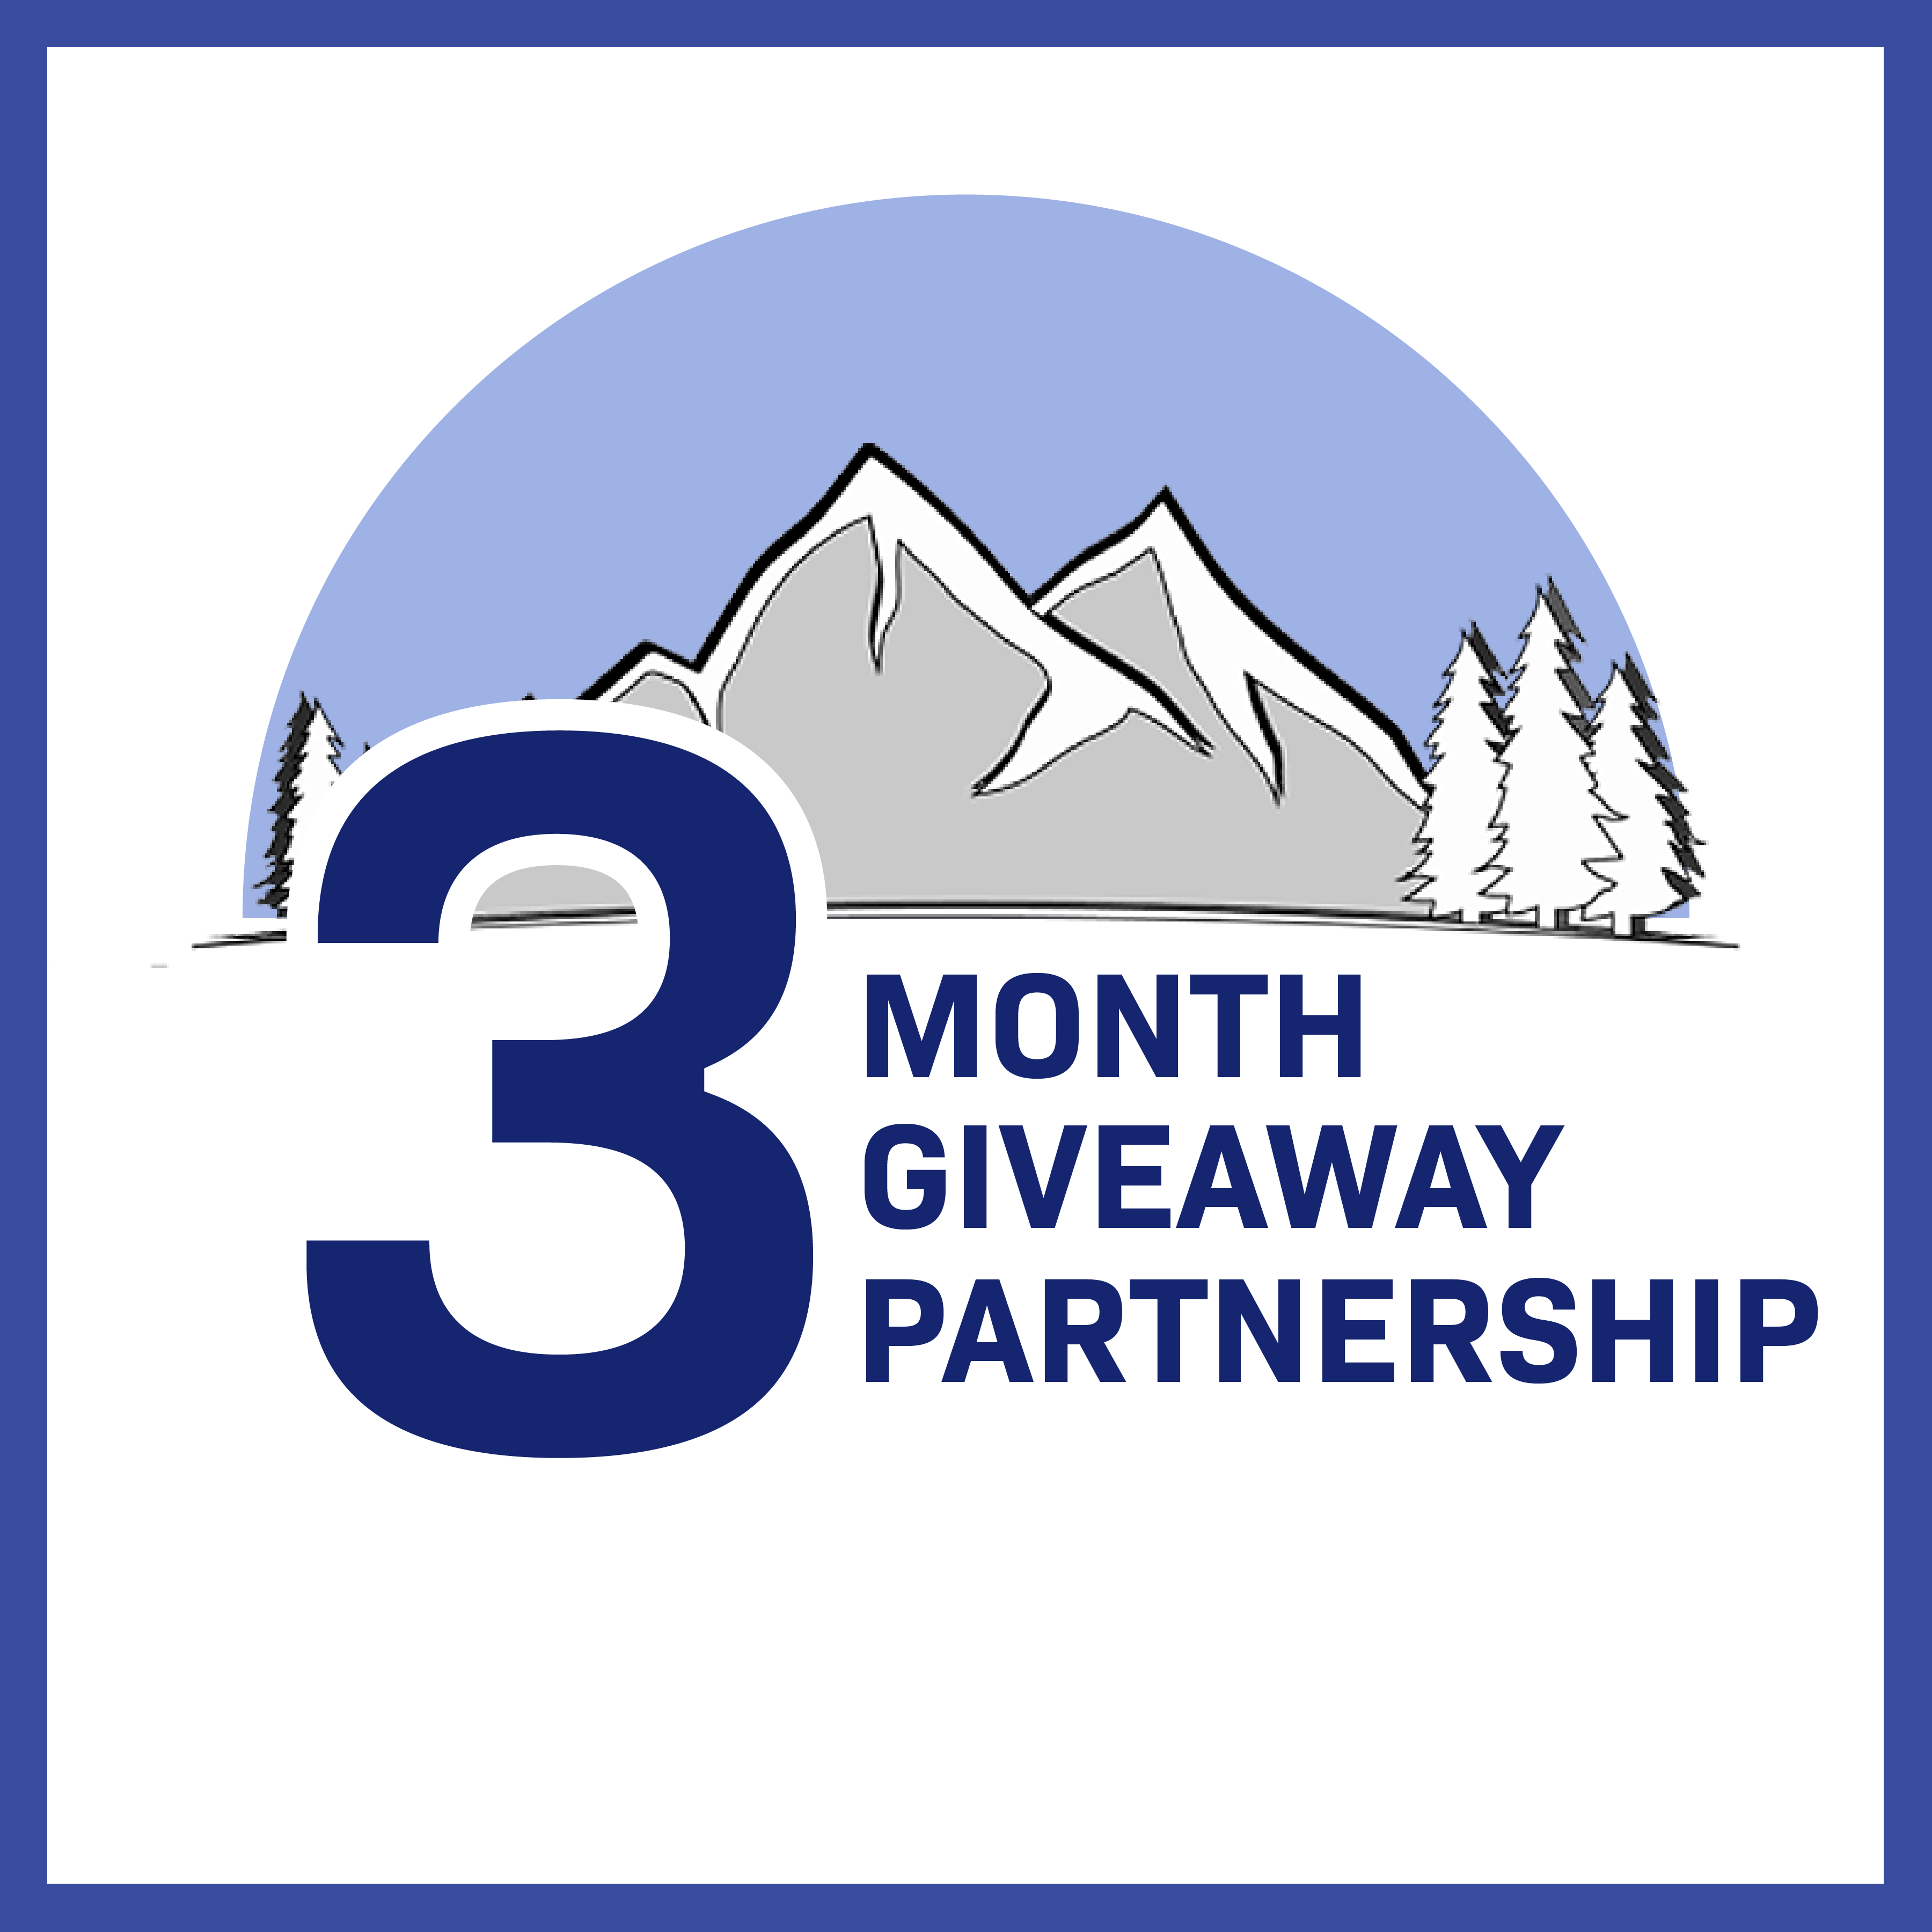 https://northcountrylocal.com/wp-content/uploads/2020/07/3-giveaway.jpg